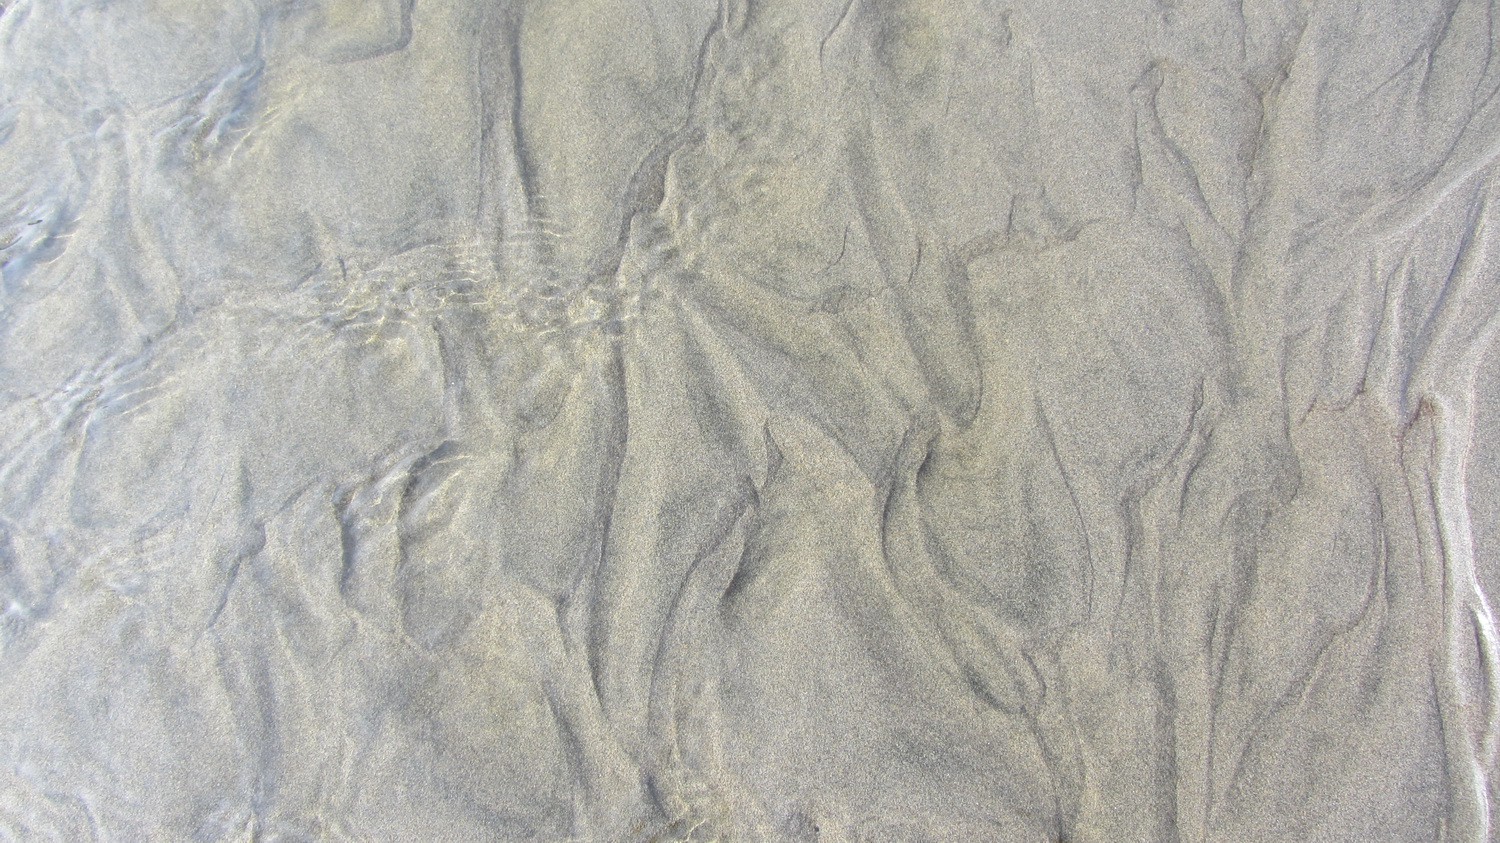 Patterns in the sand of the Huevil Beach